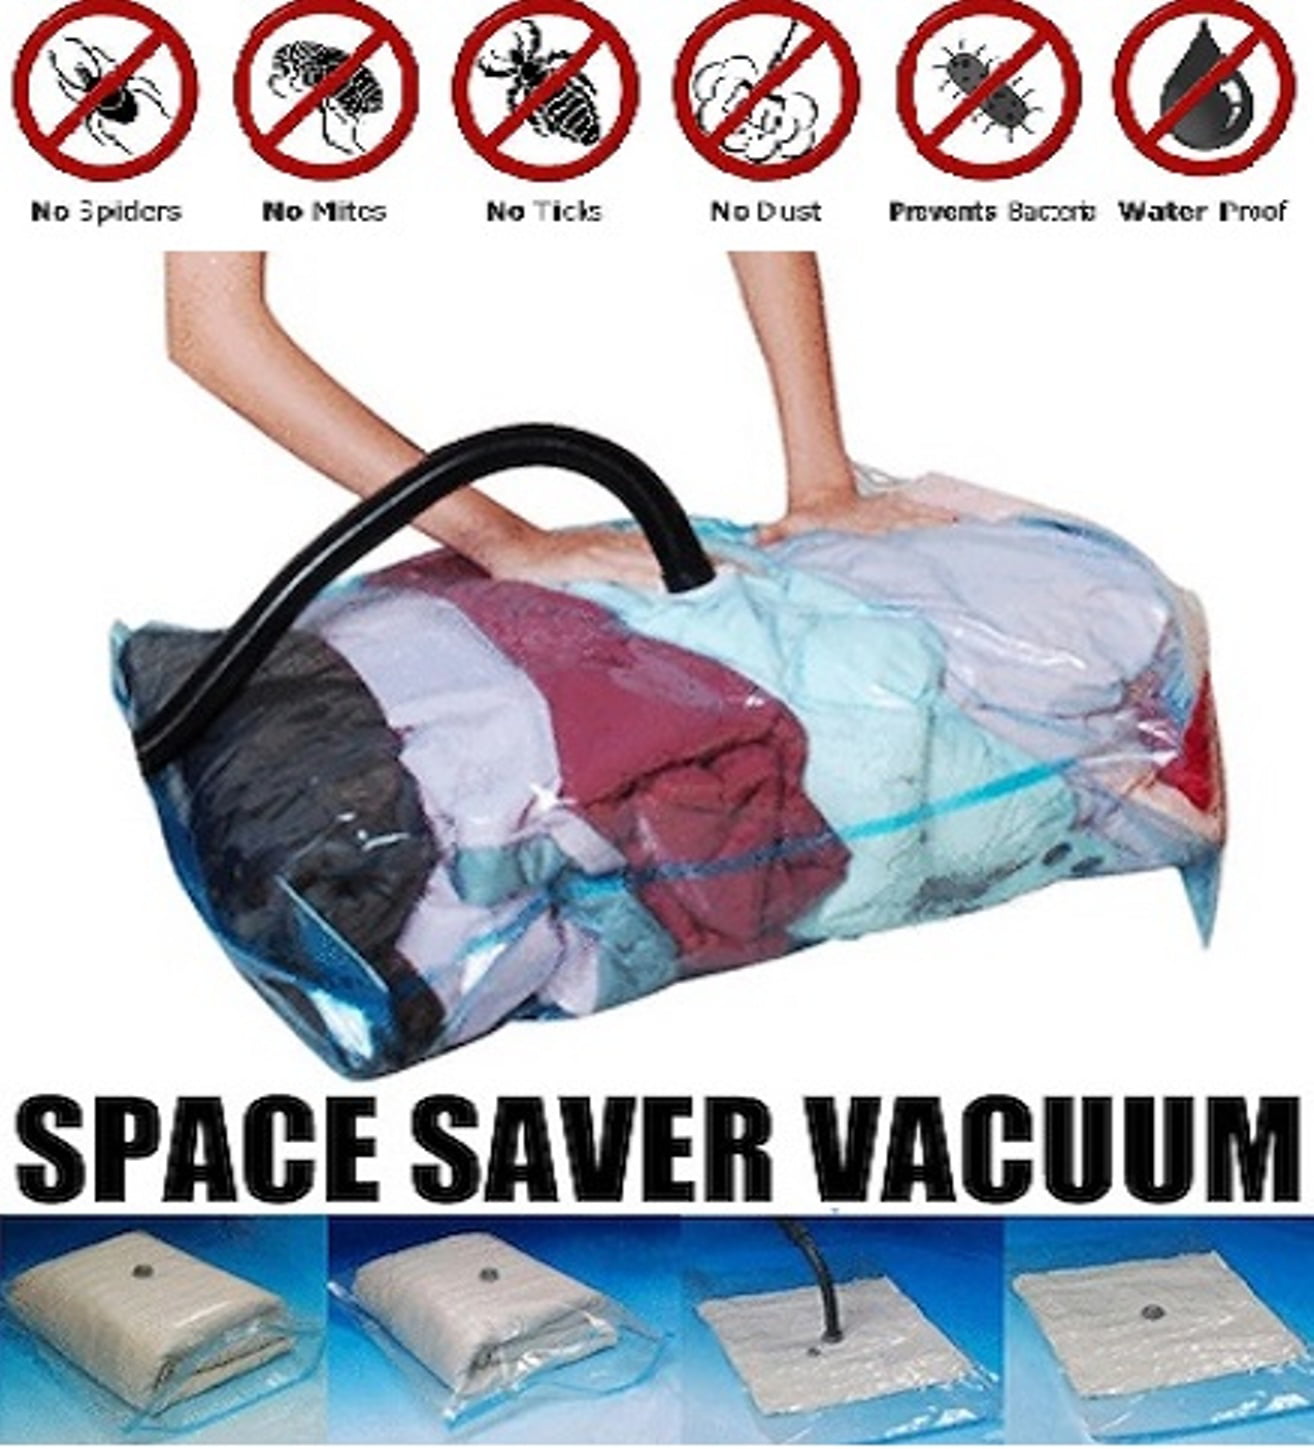 Wholesale giant vacuum storage bag to Save Space and Make Storage